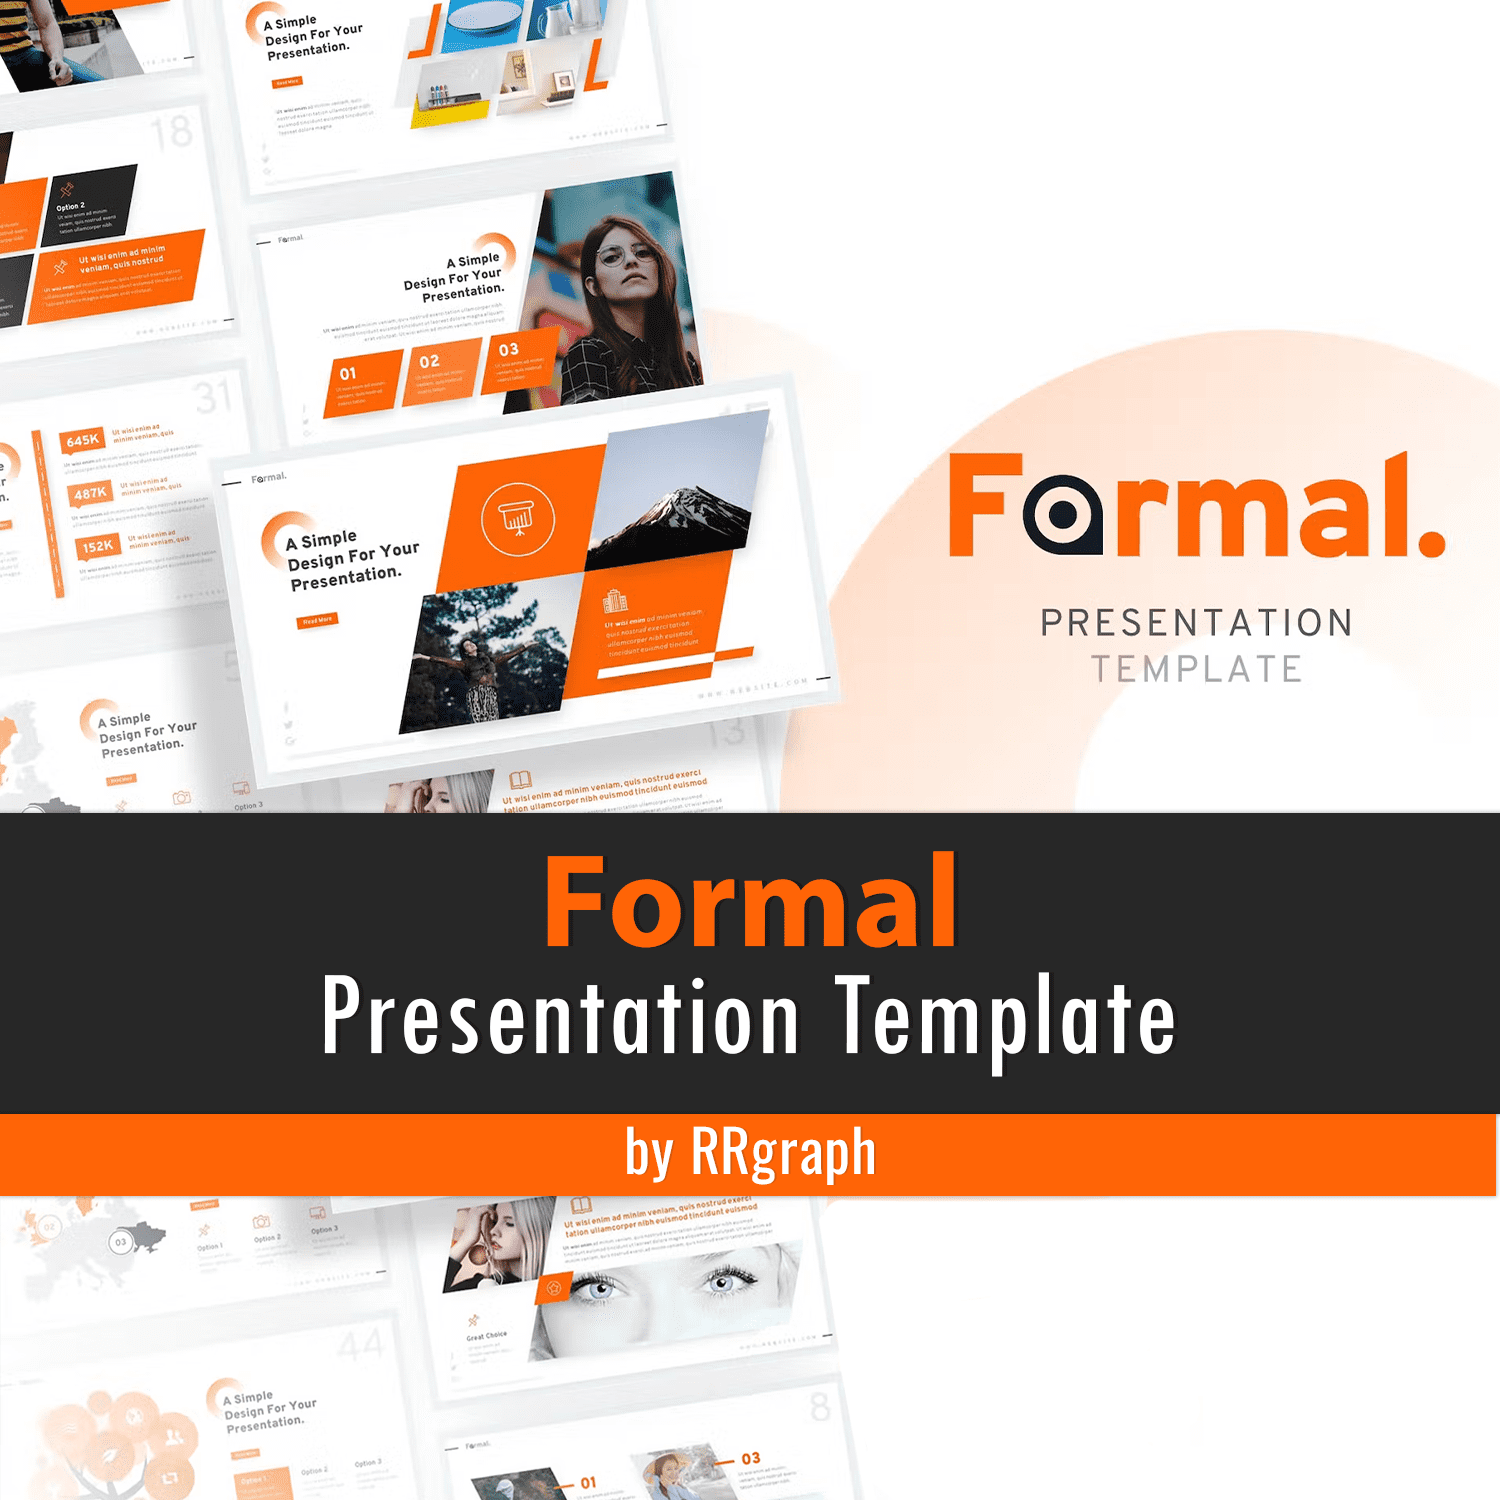 Template For Formal Presentations Cover.